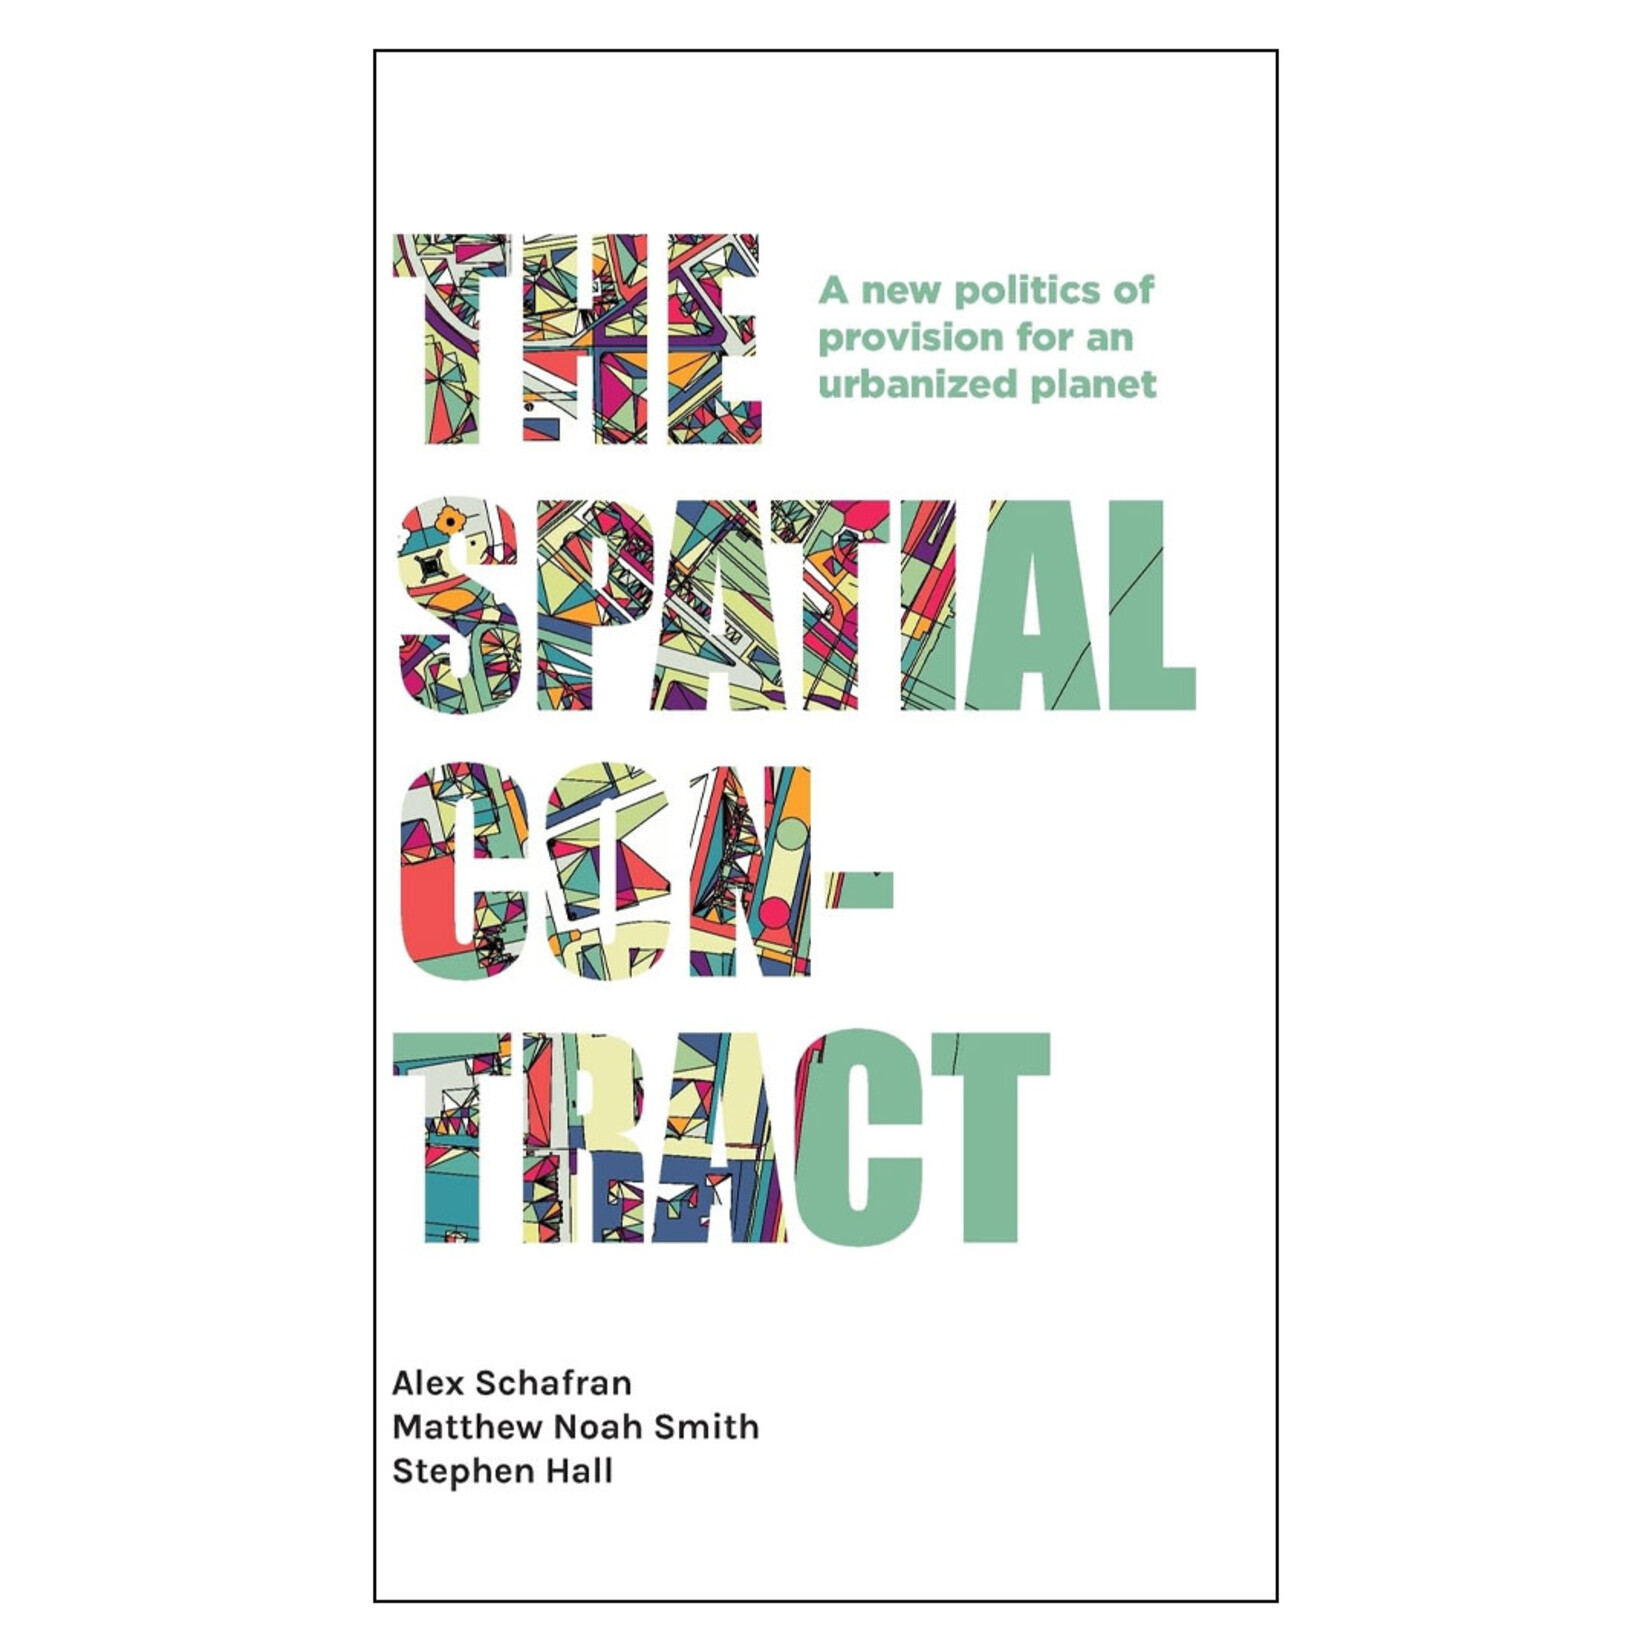 Spatial contract: A new politics of provision for an urbanized planet